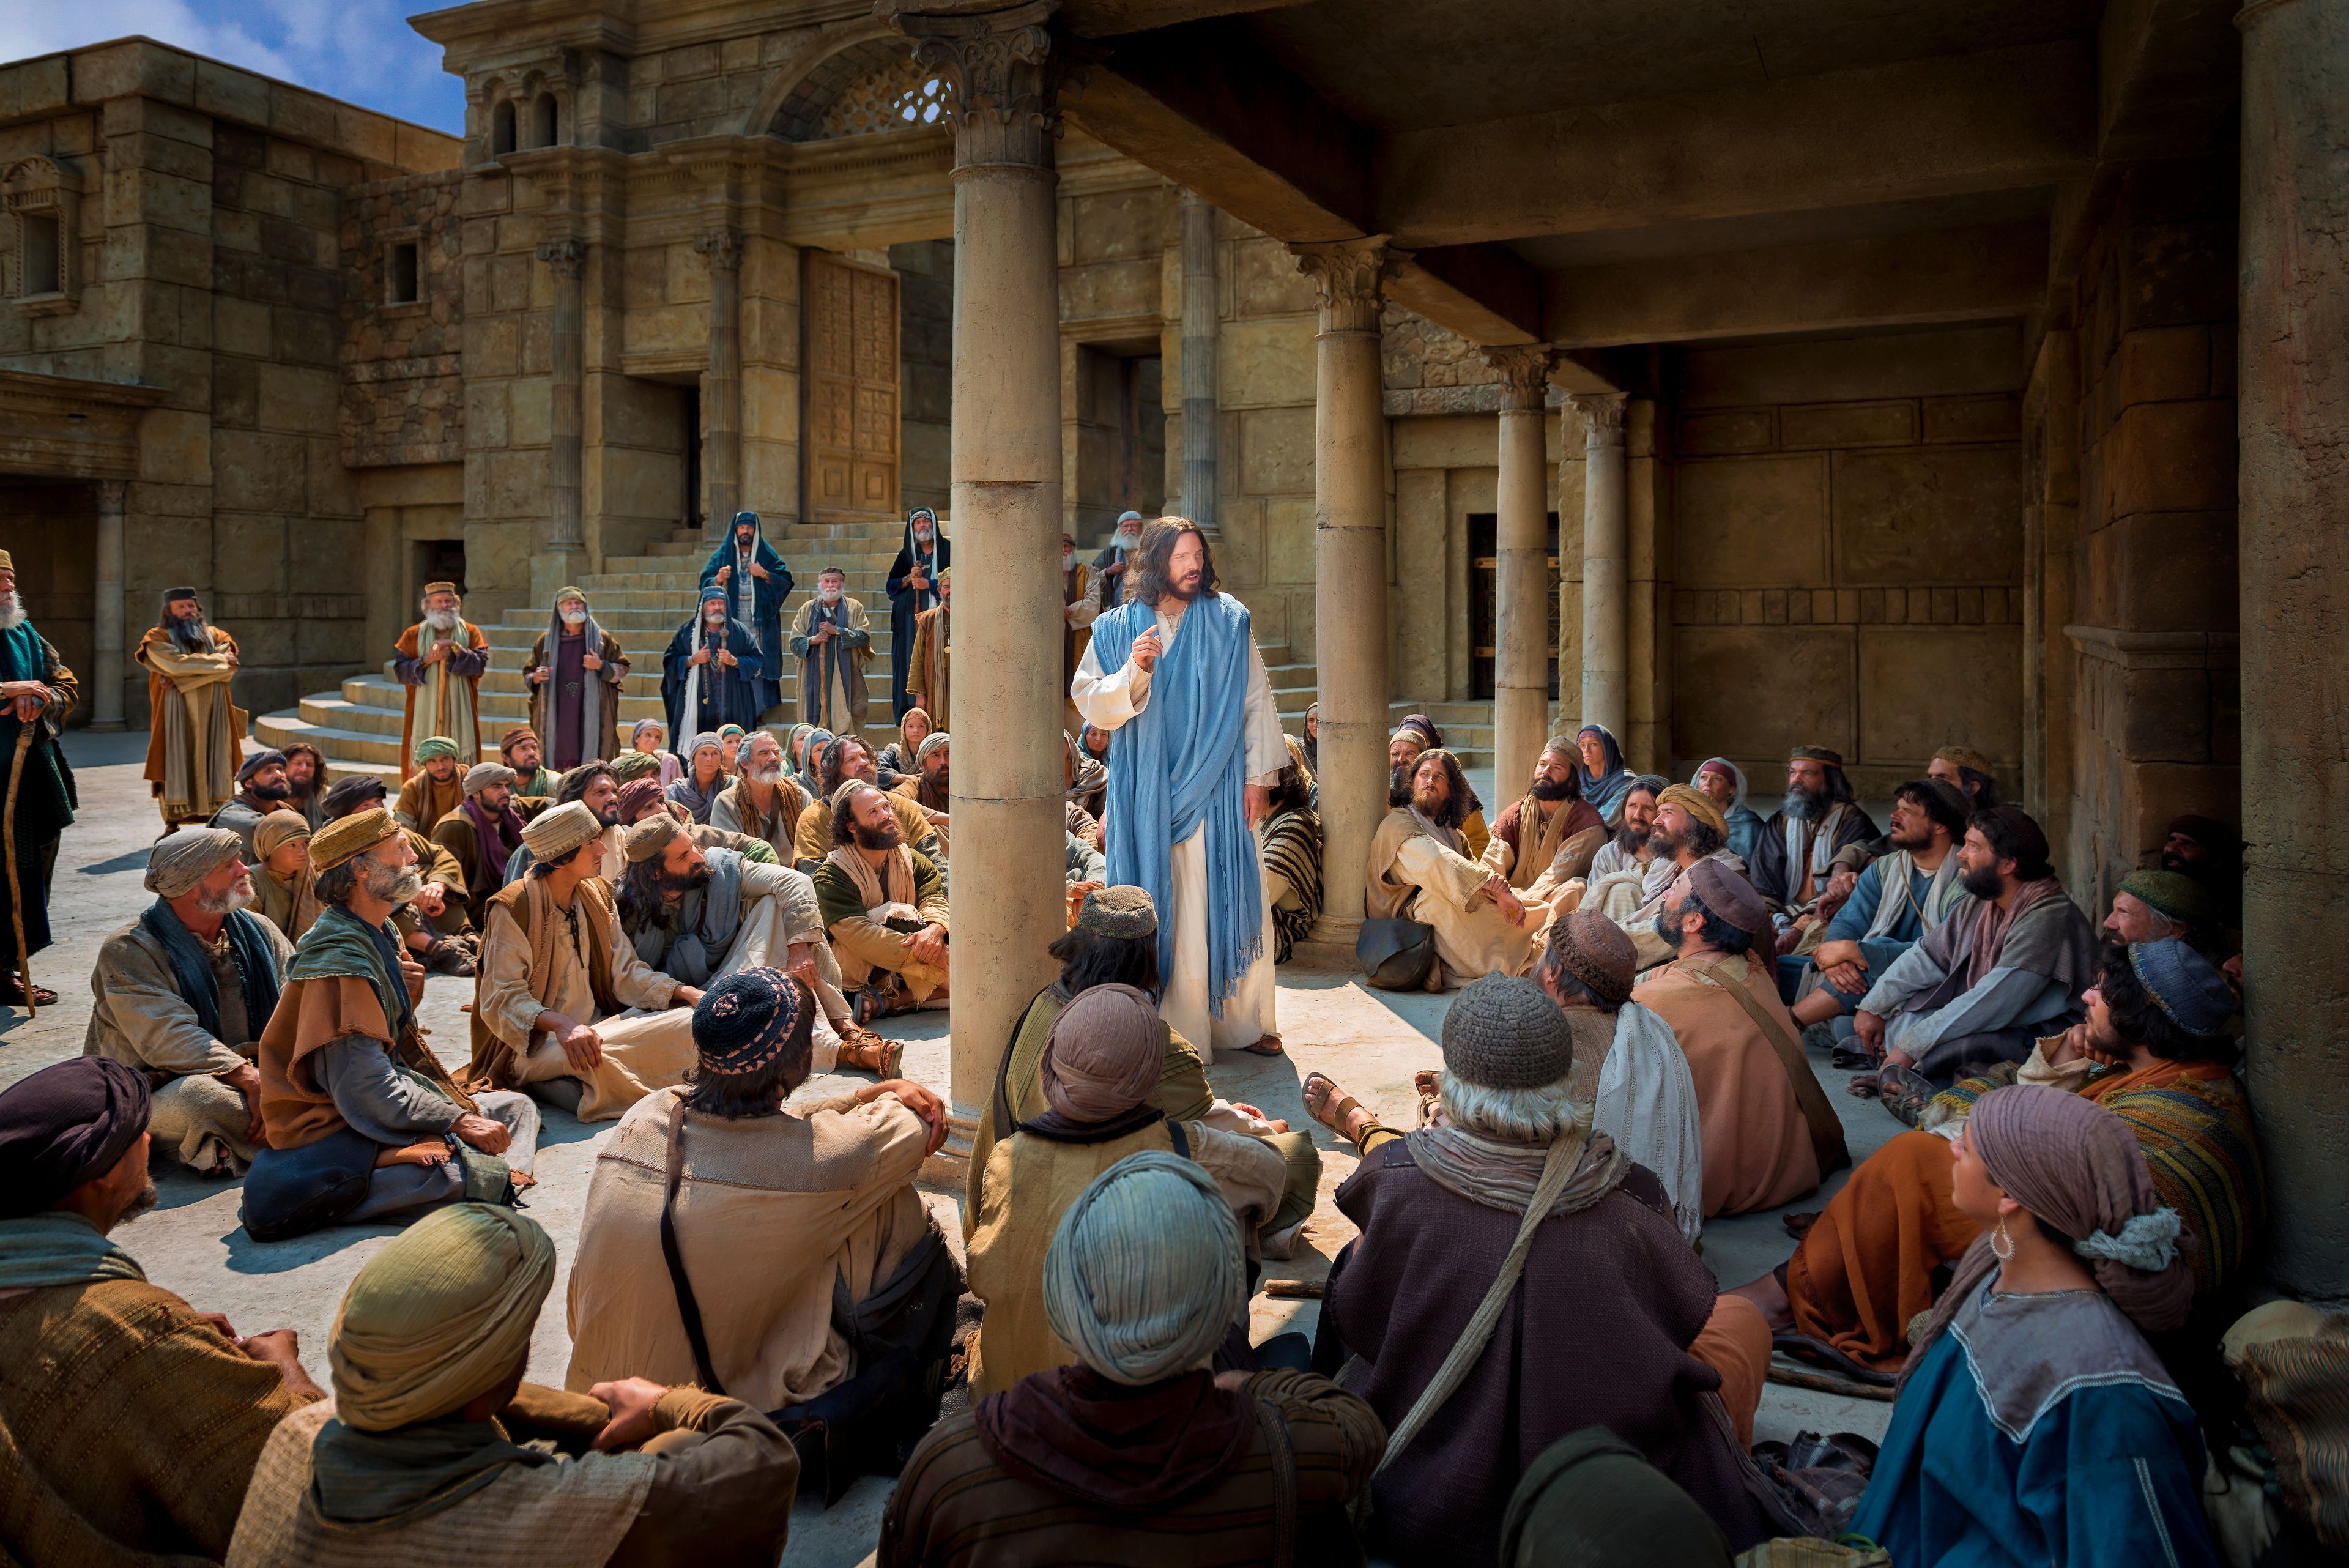 Christ teaches a crowd of people.